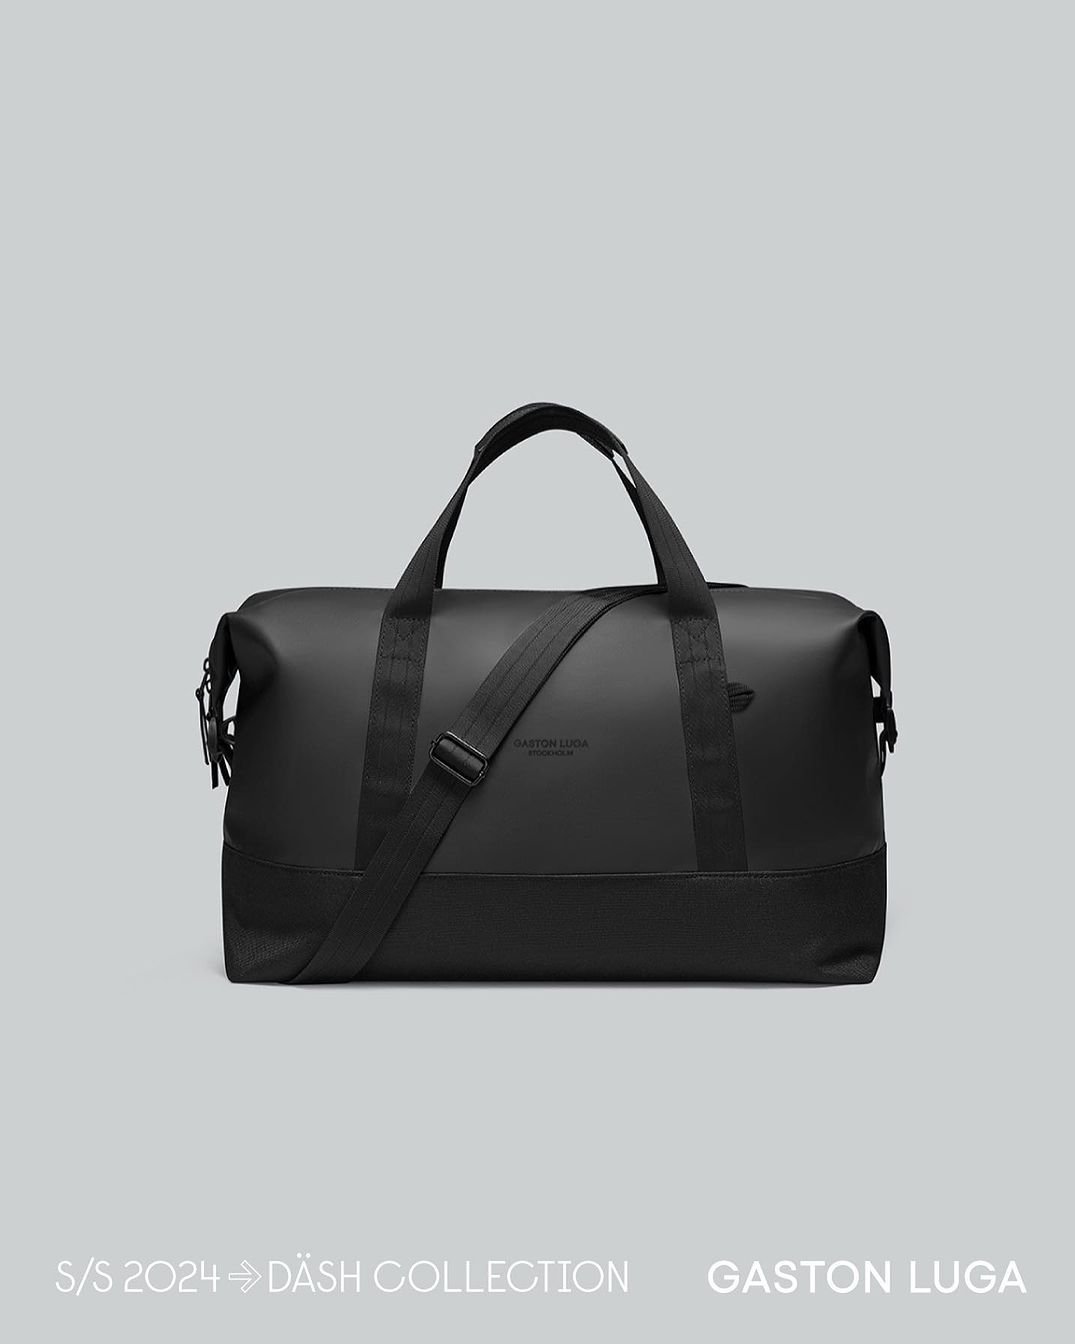 The Duffel bag is spacious enough to hold all of your essentials, making it an ideal choice for a quick trip or a workout session.Available in three colours at gastonluga.com.#gastonluga